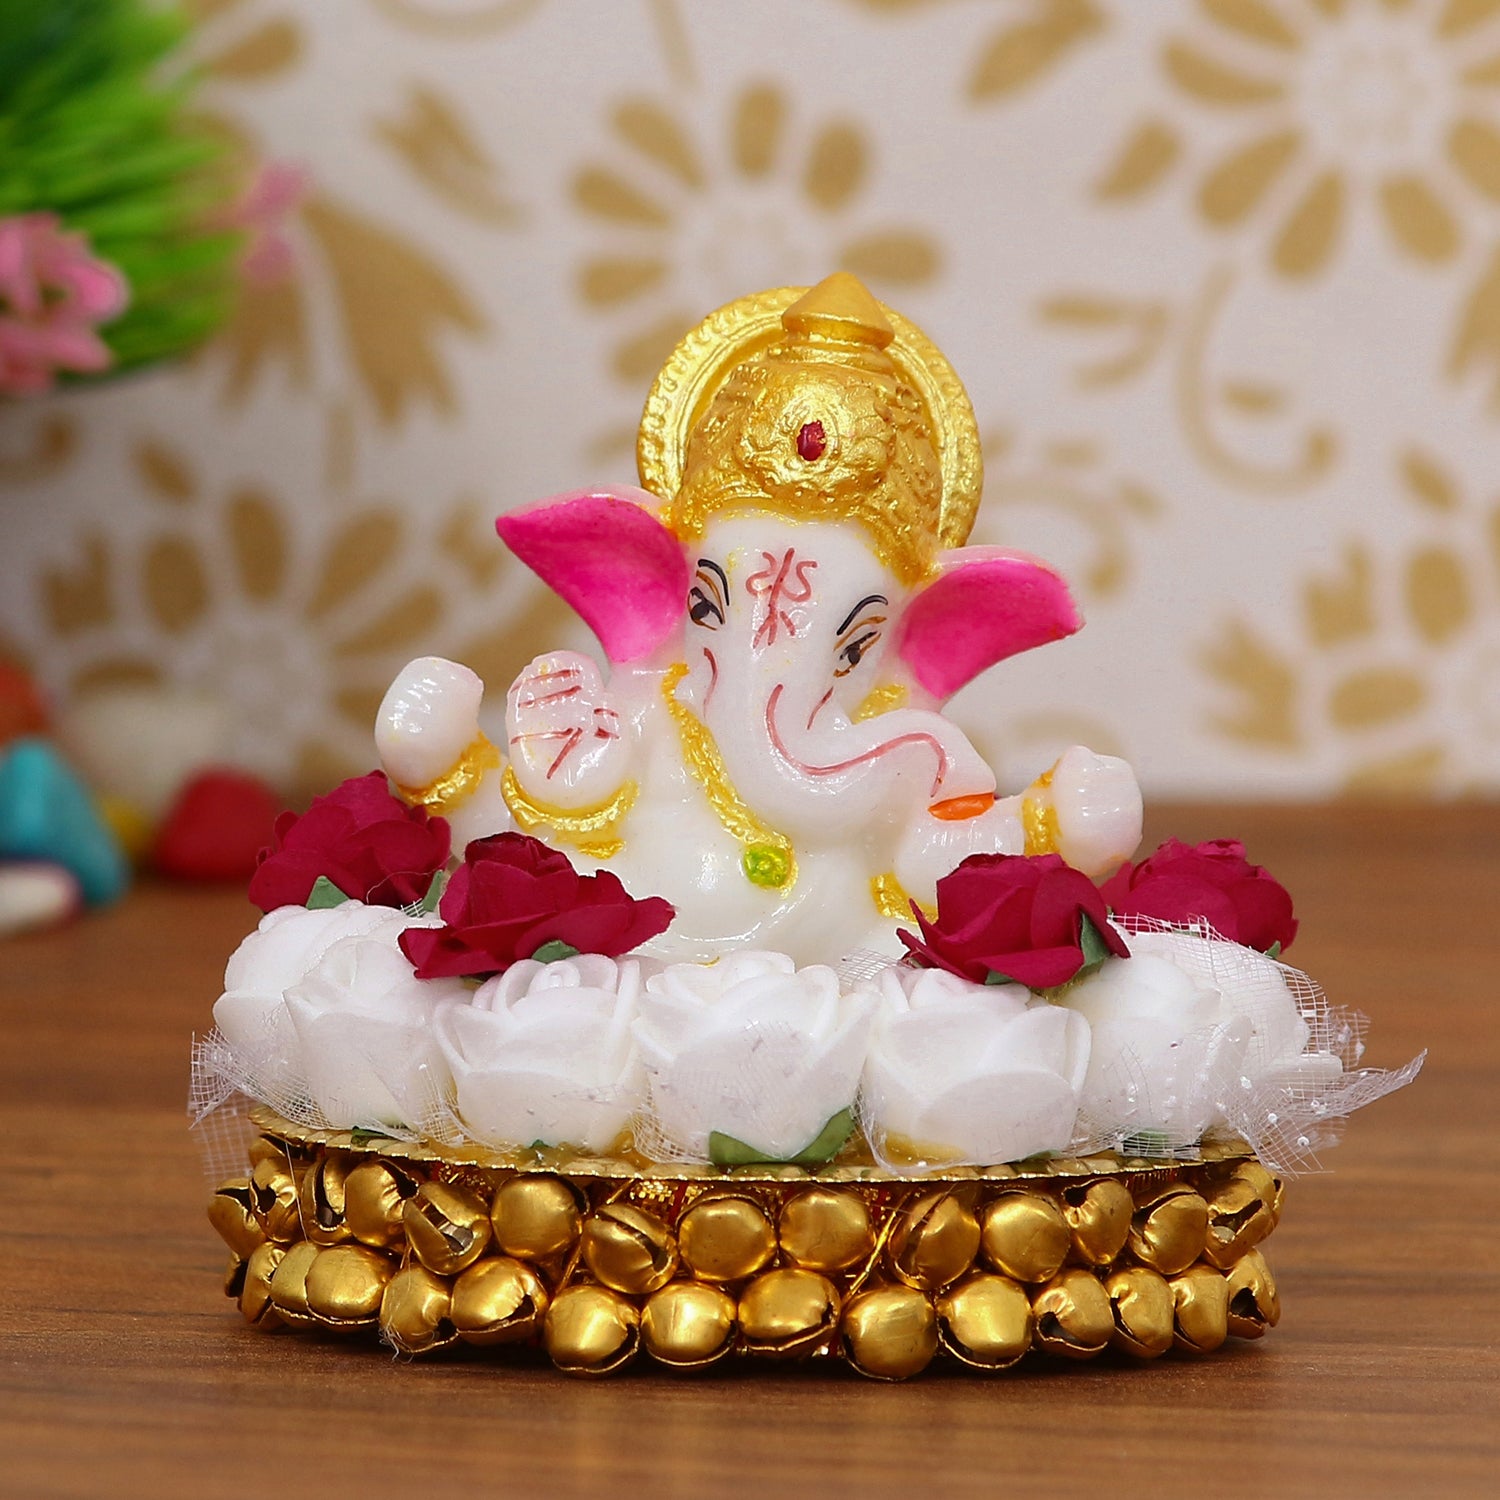 Lord Ganesha Idol on Decorative Handcrafted Plate with White Flowers